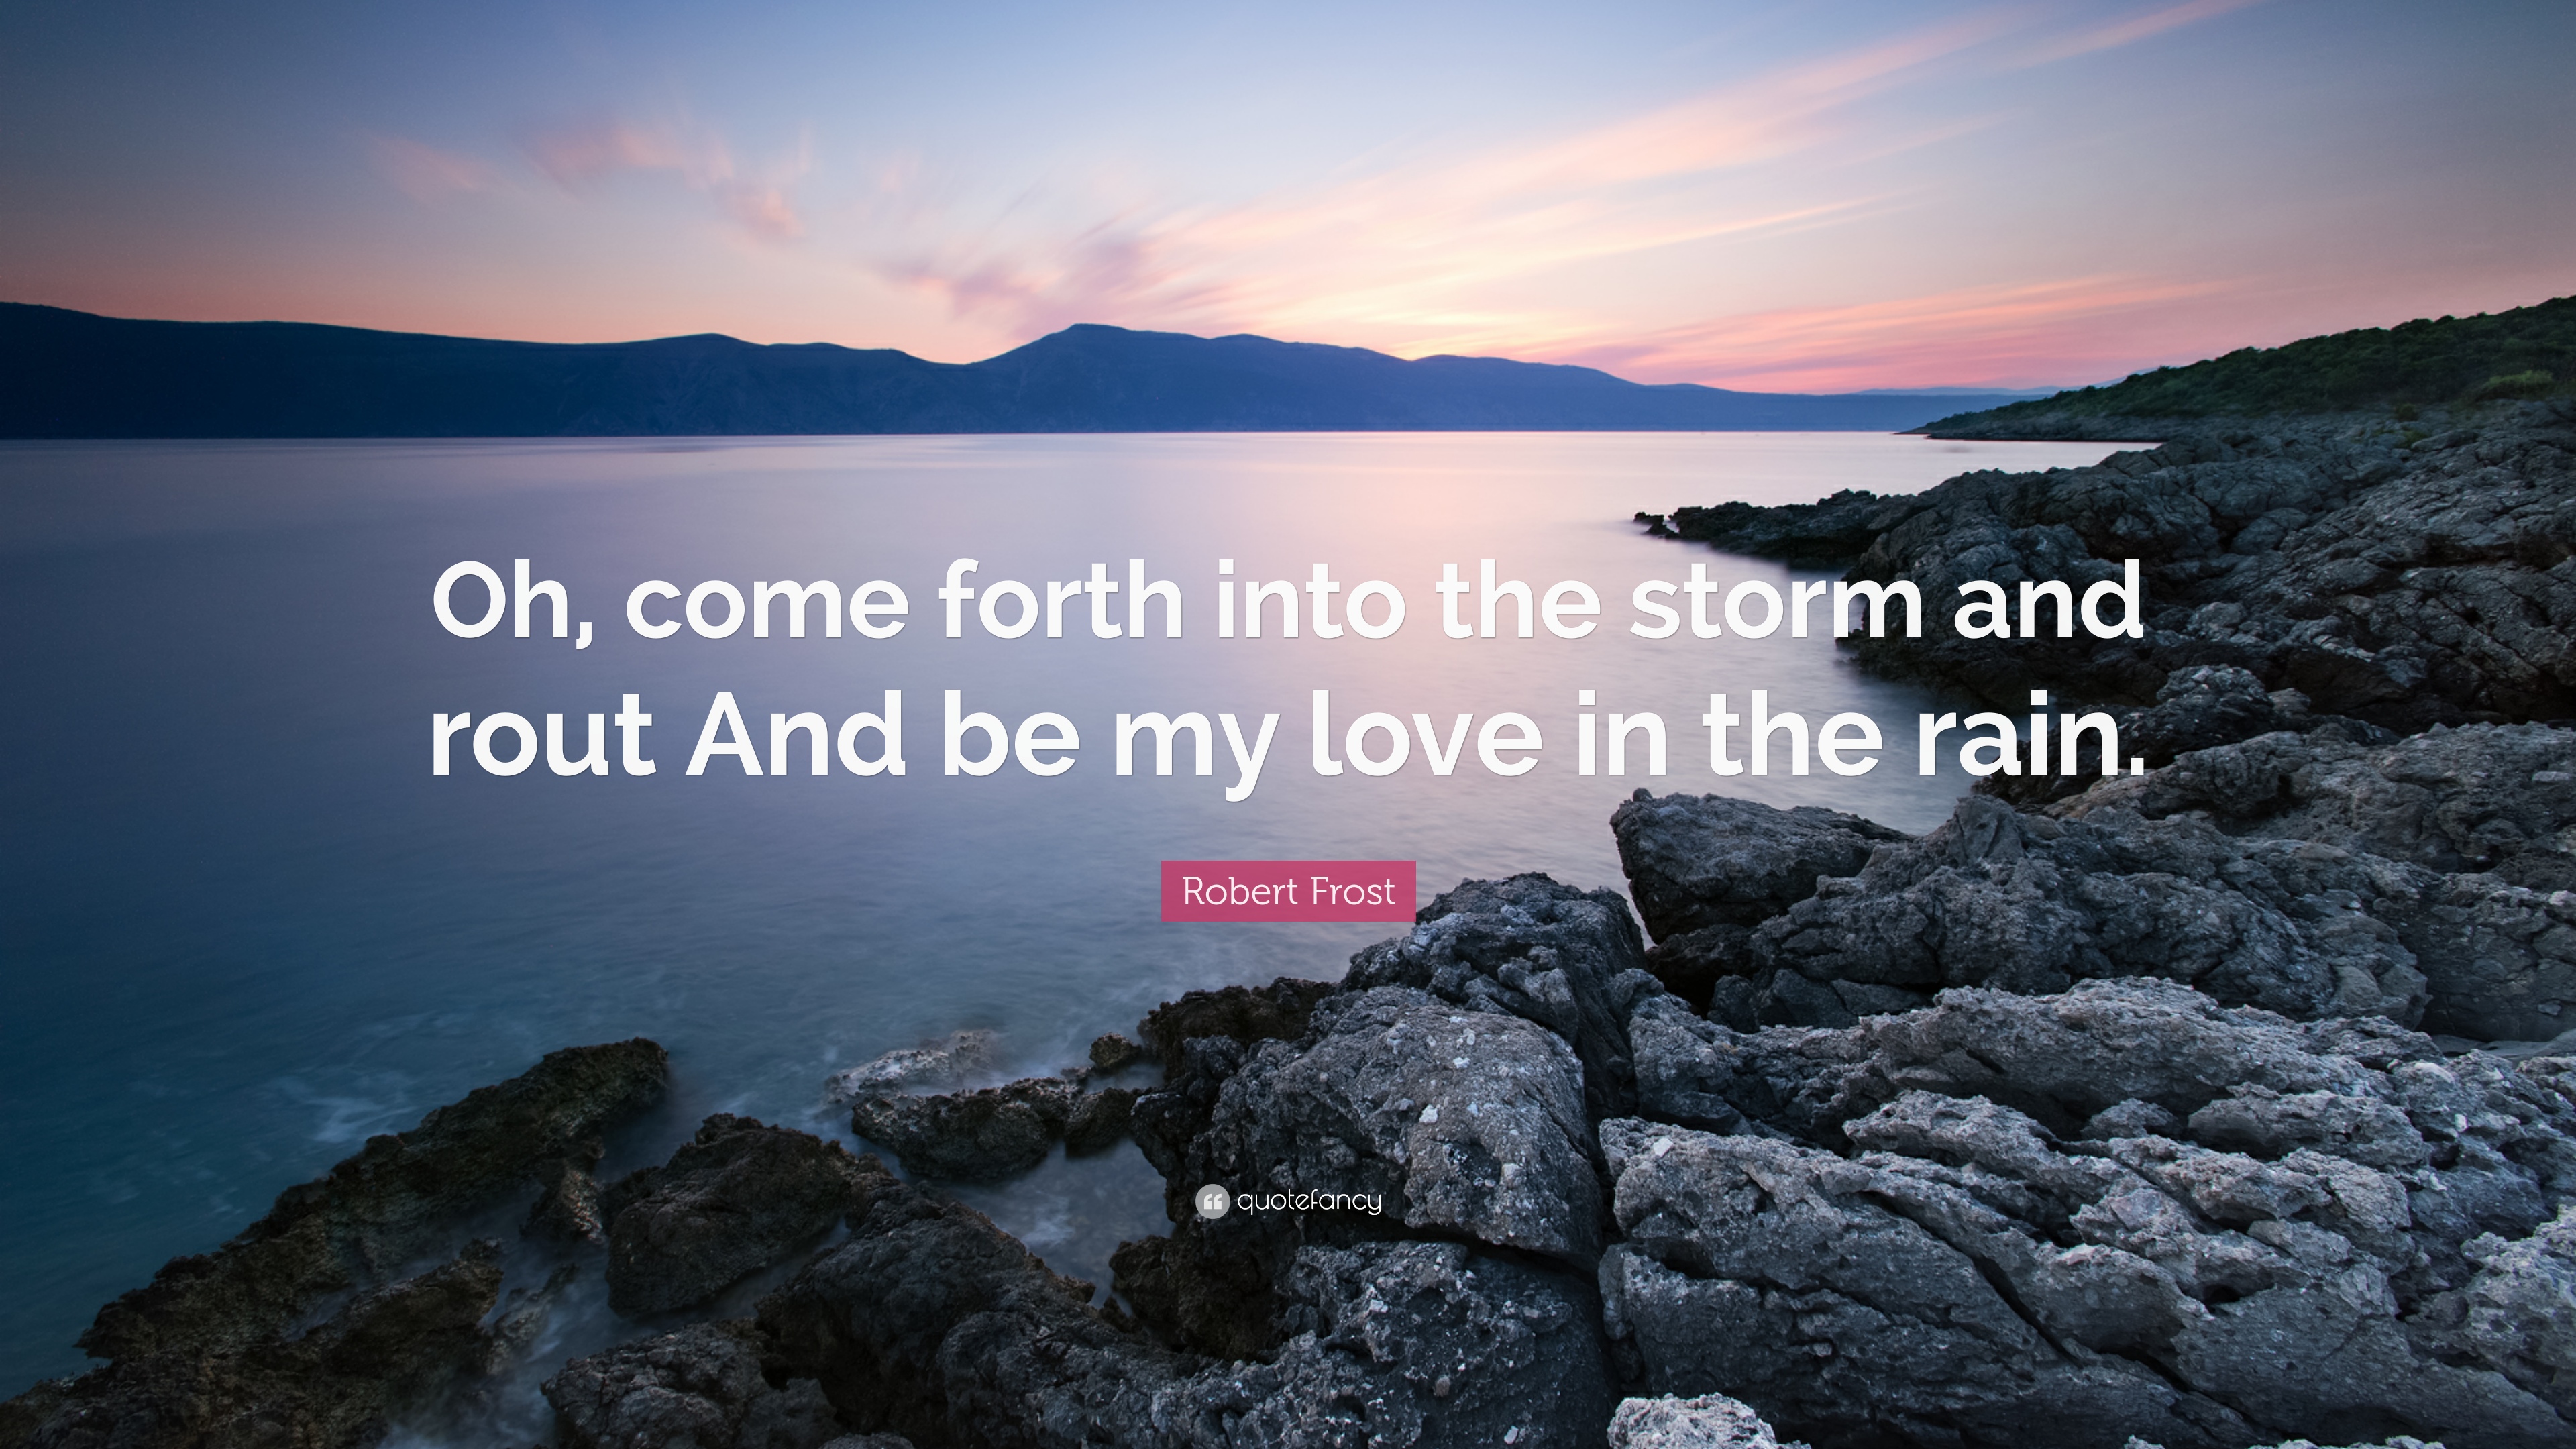 Robert Frost Quote: “Oh, come forth into the storm and rout And be